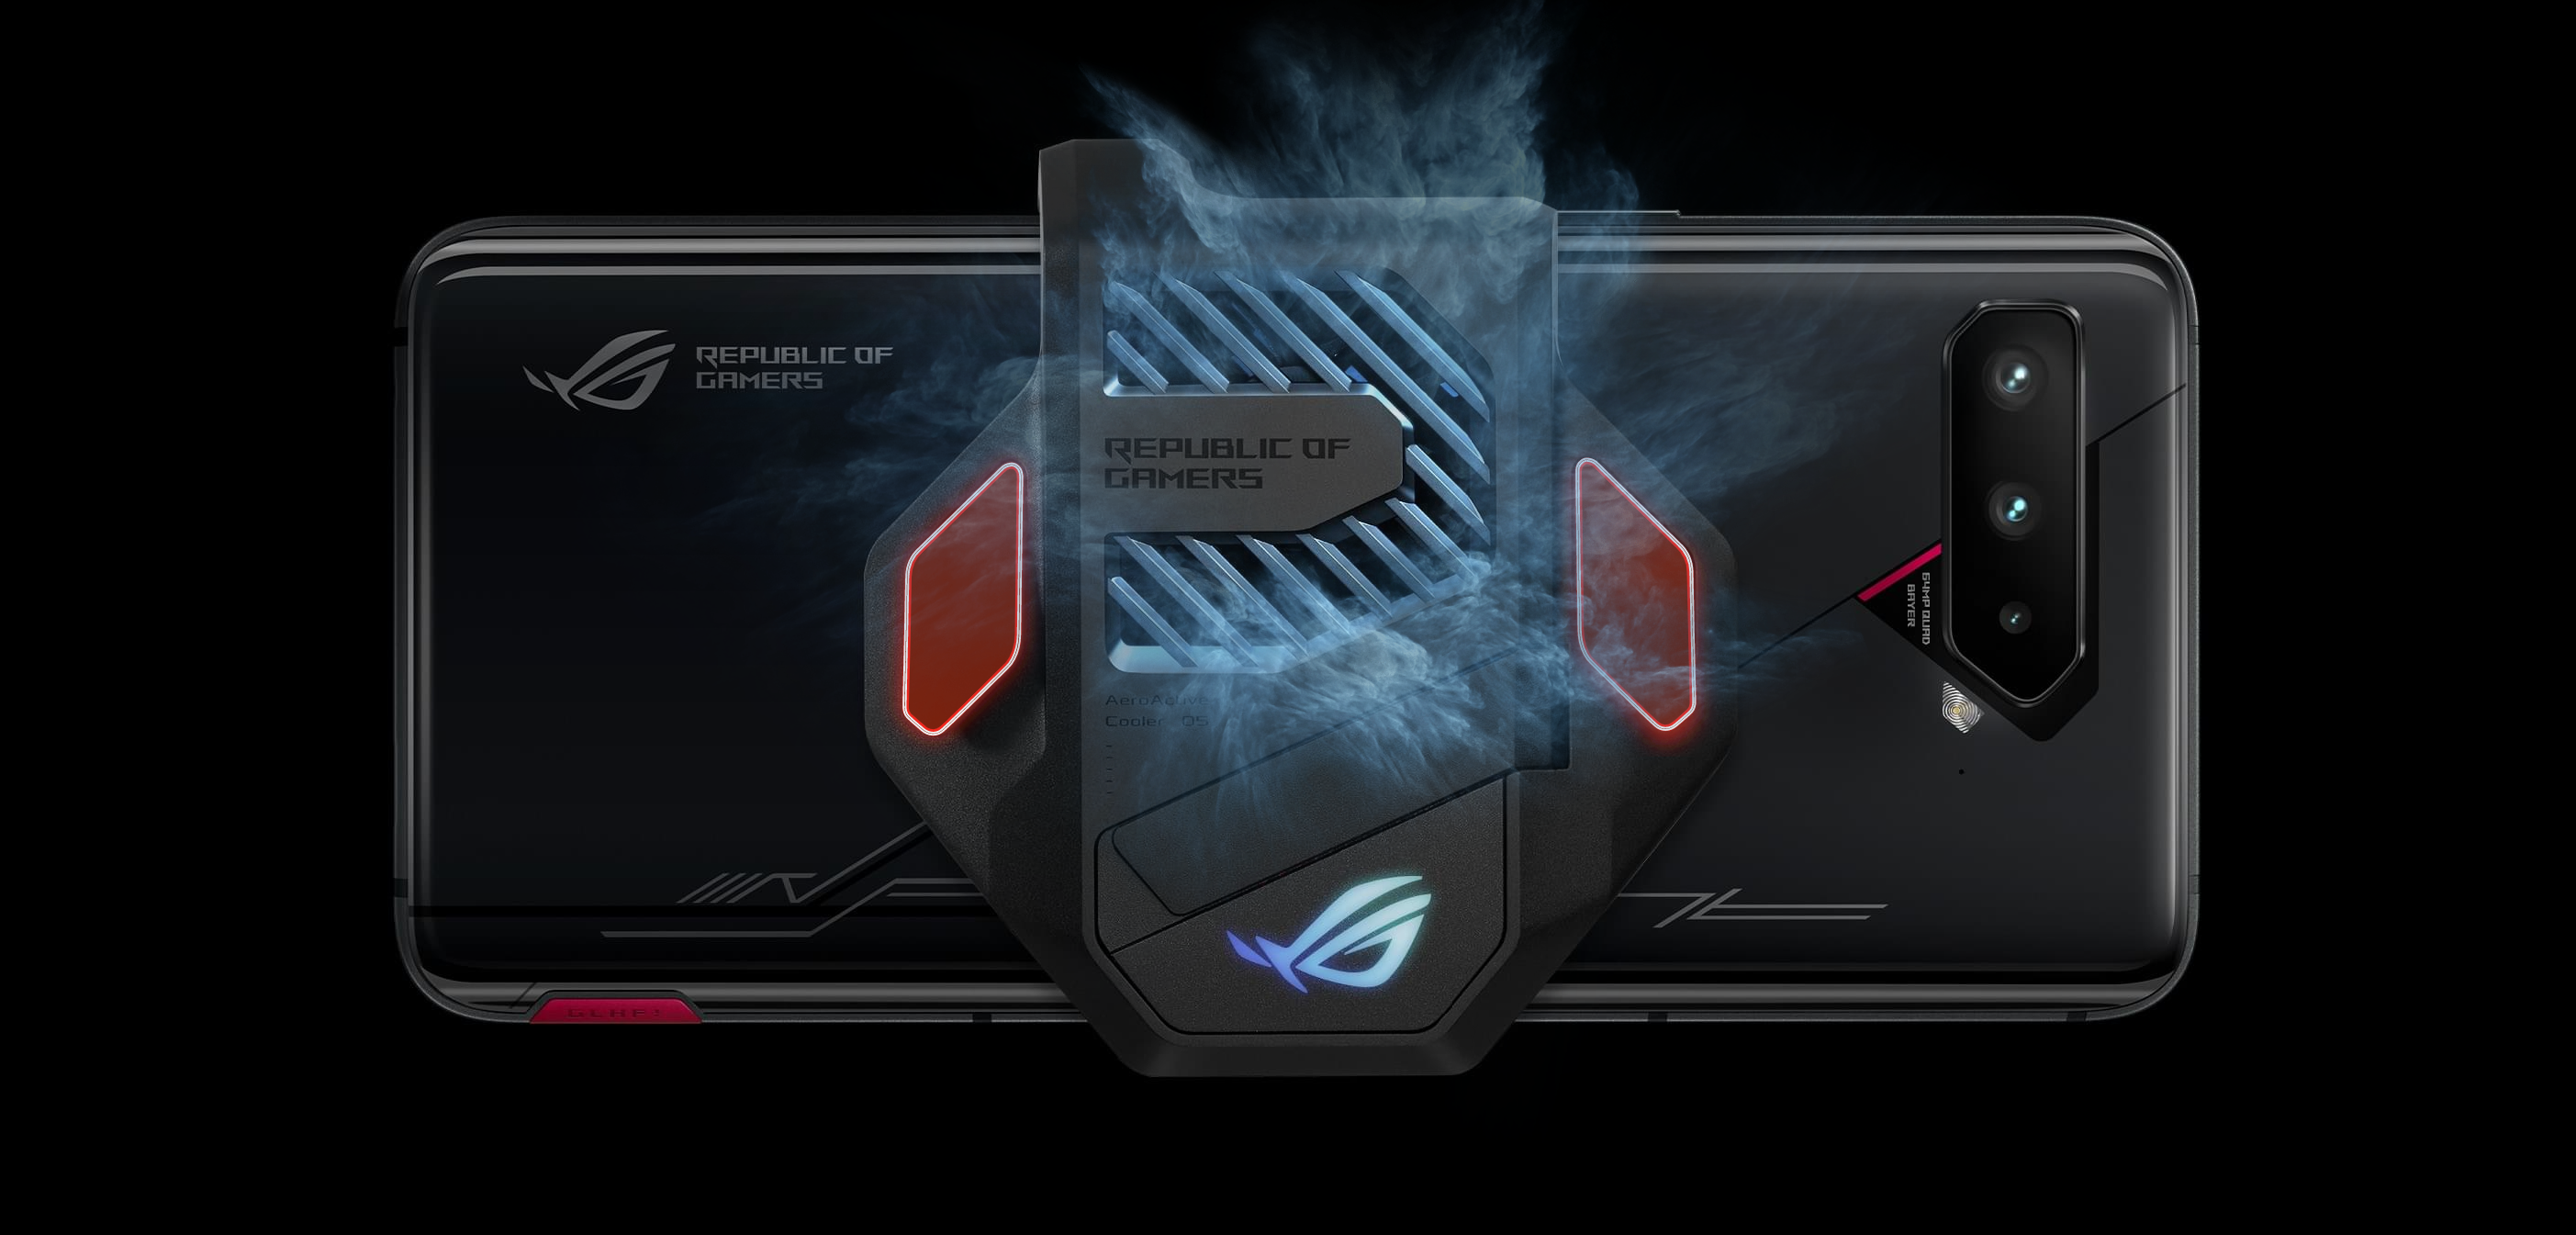 In case you're concerned with thermal throttling, Asus also makes a fan add-on to help cool the back of the ROG Phone 5s.  (Image: Asus)